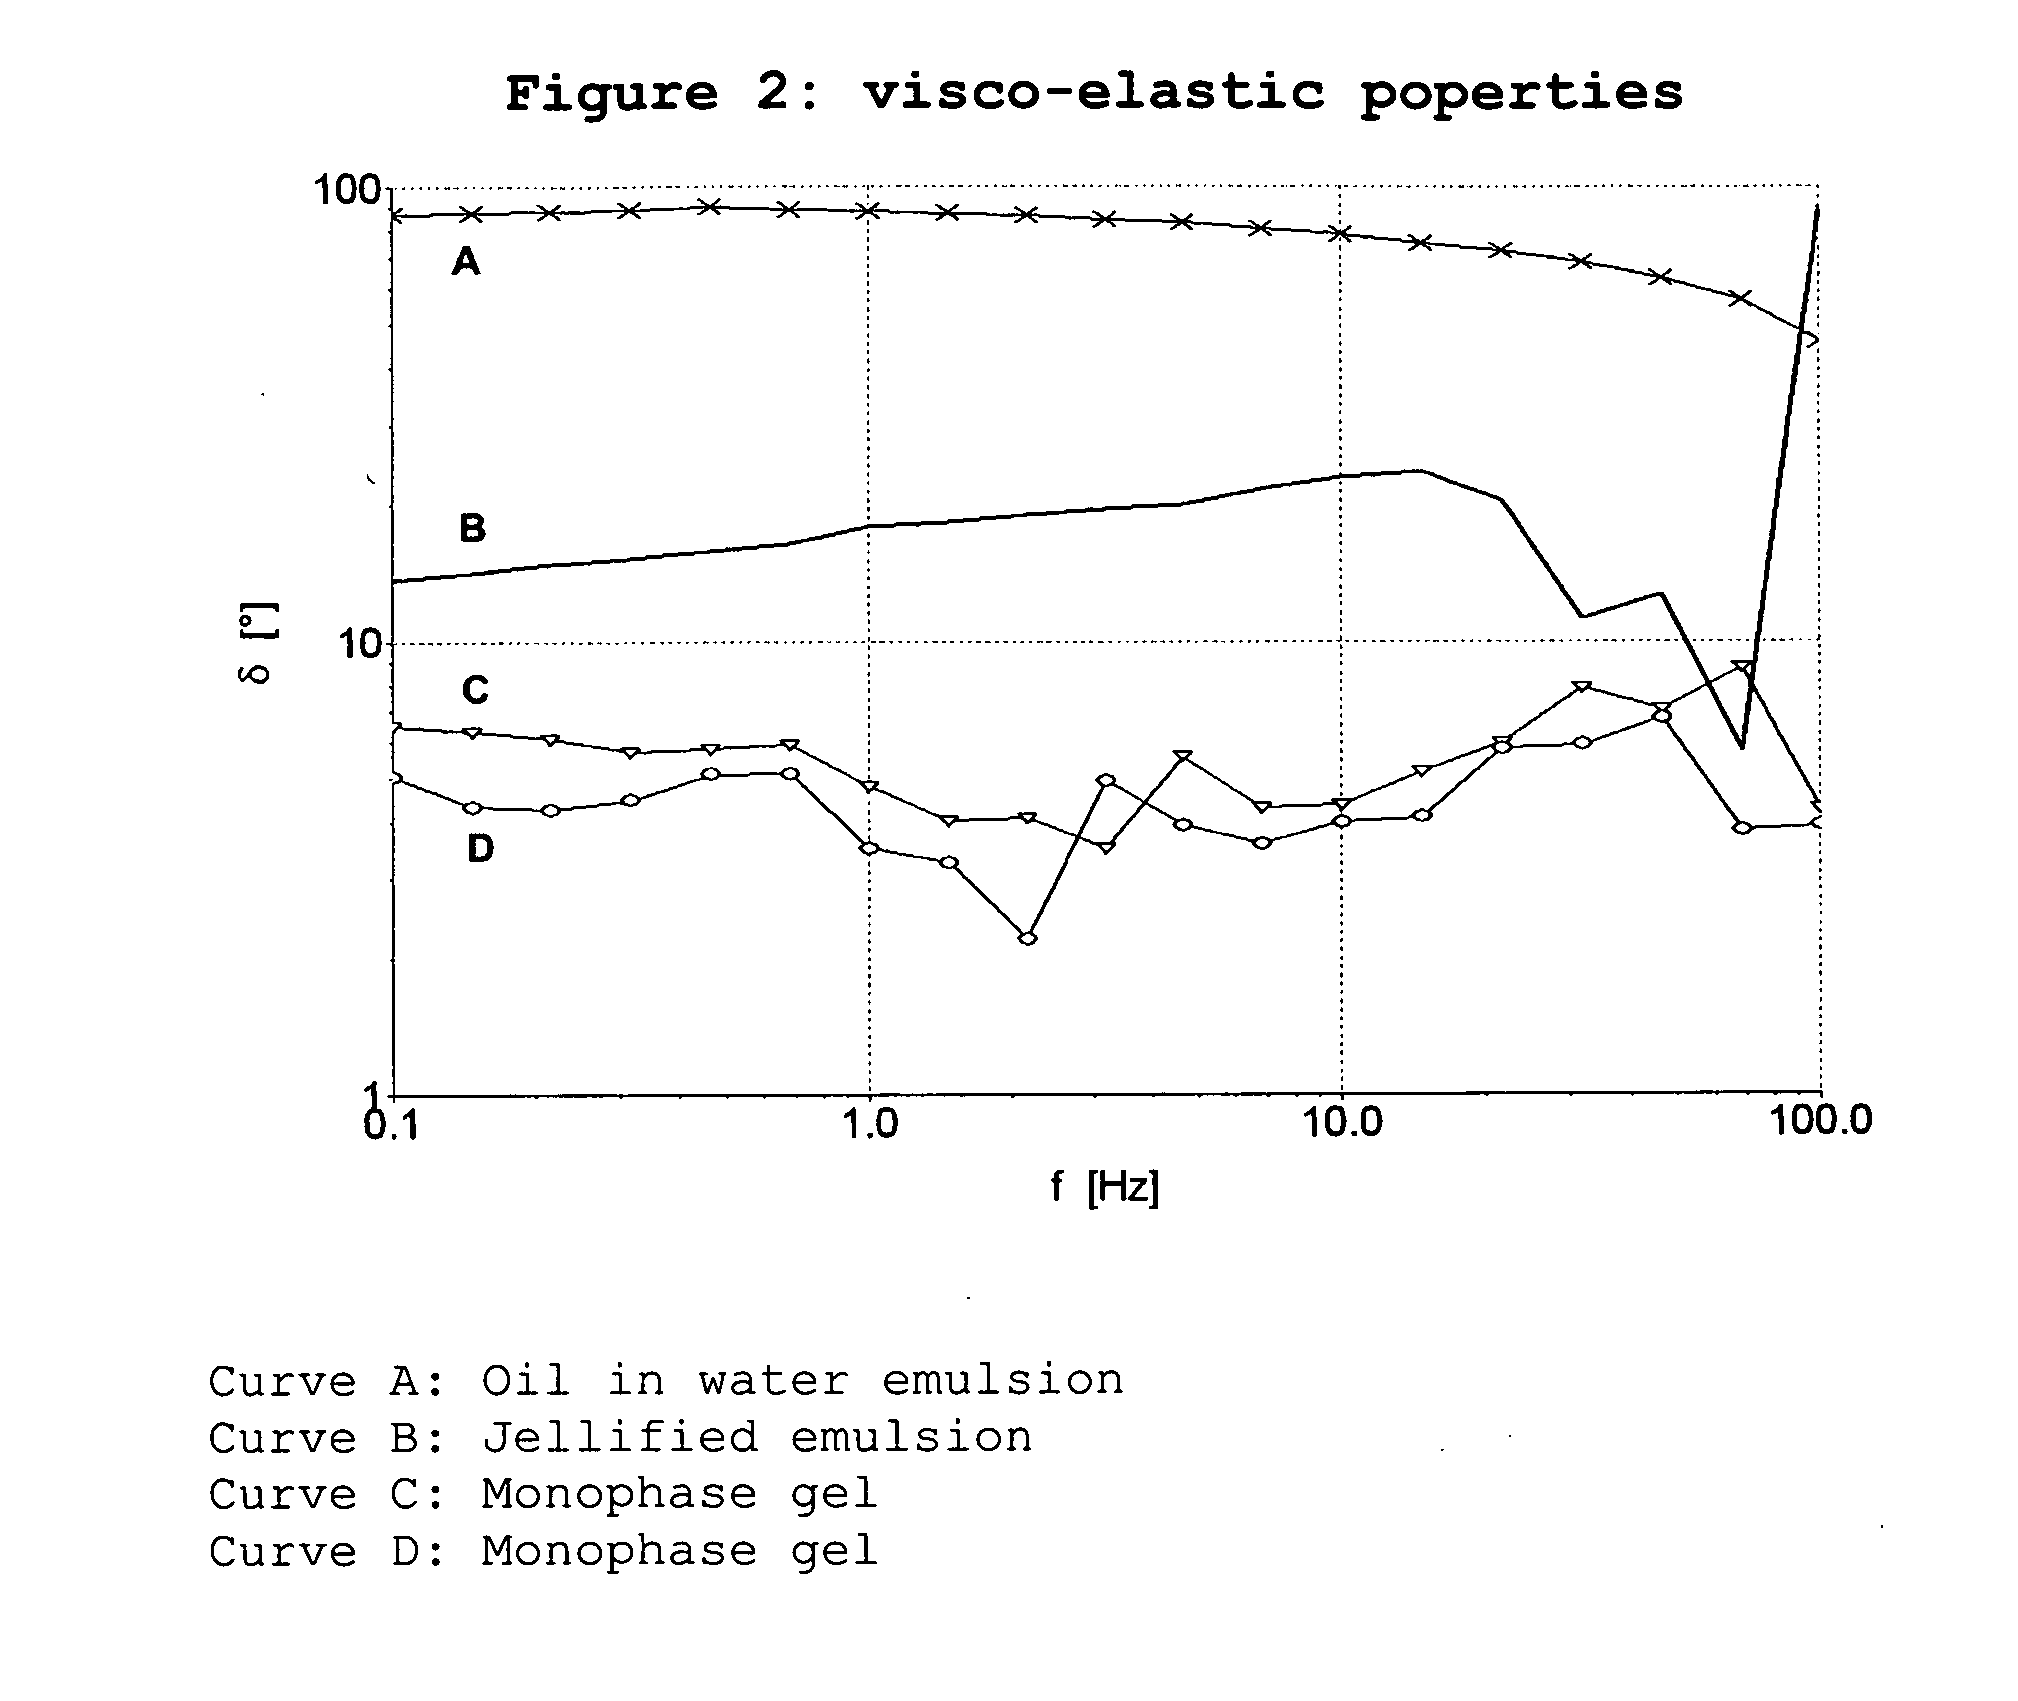 Modified release emulsions for application to skin or vaginal mucosa